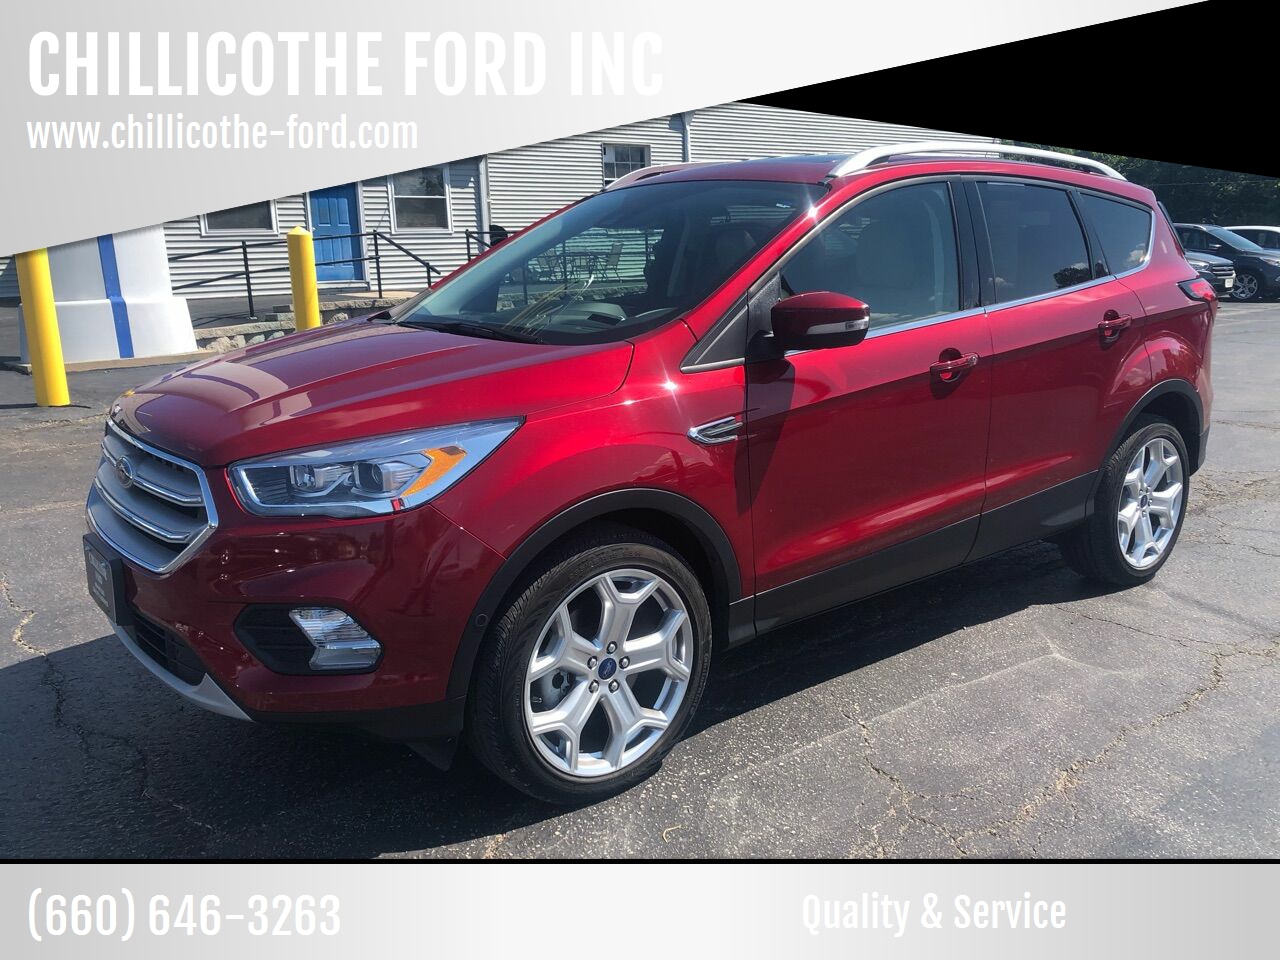 Used 19 Ford Escape For Sale At Chillicothe Ford Vin 1fmcu9j95kuc